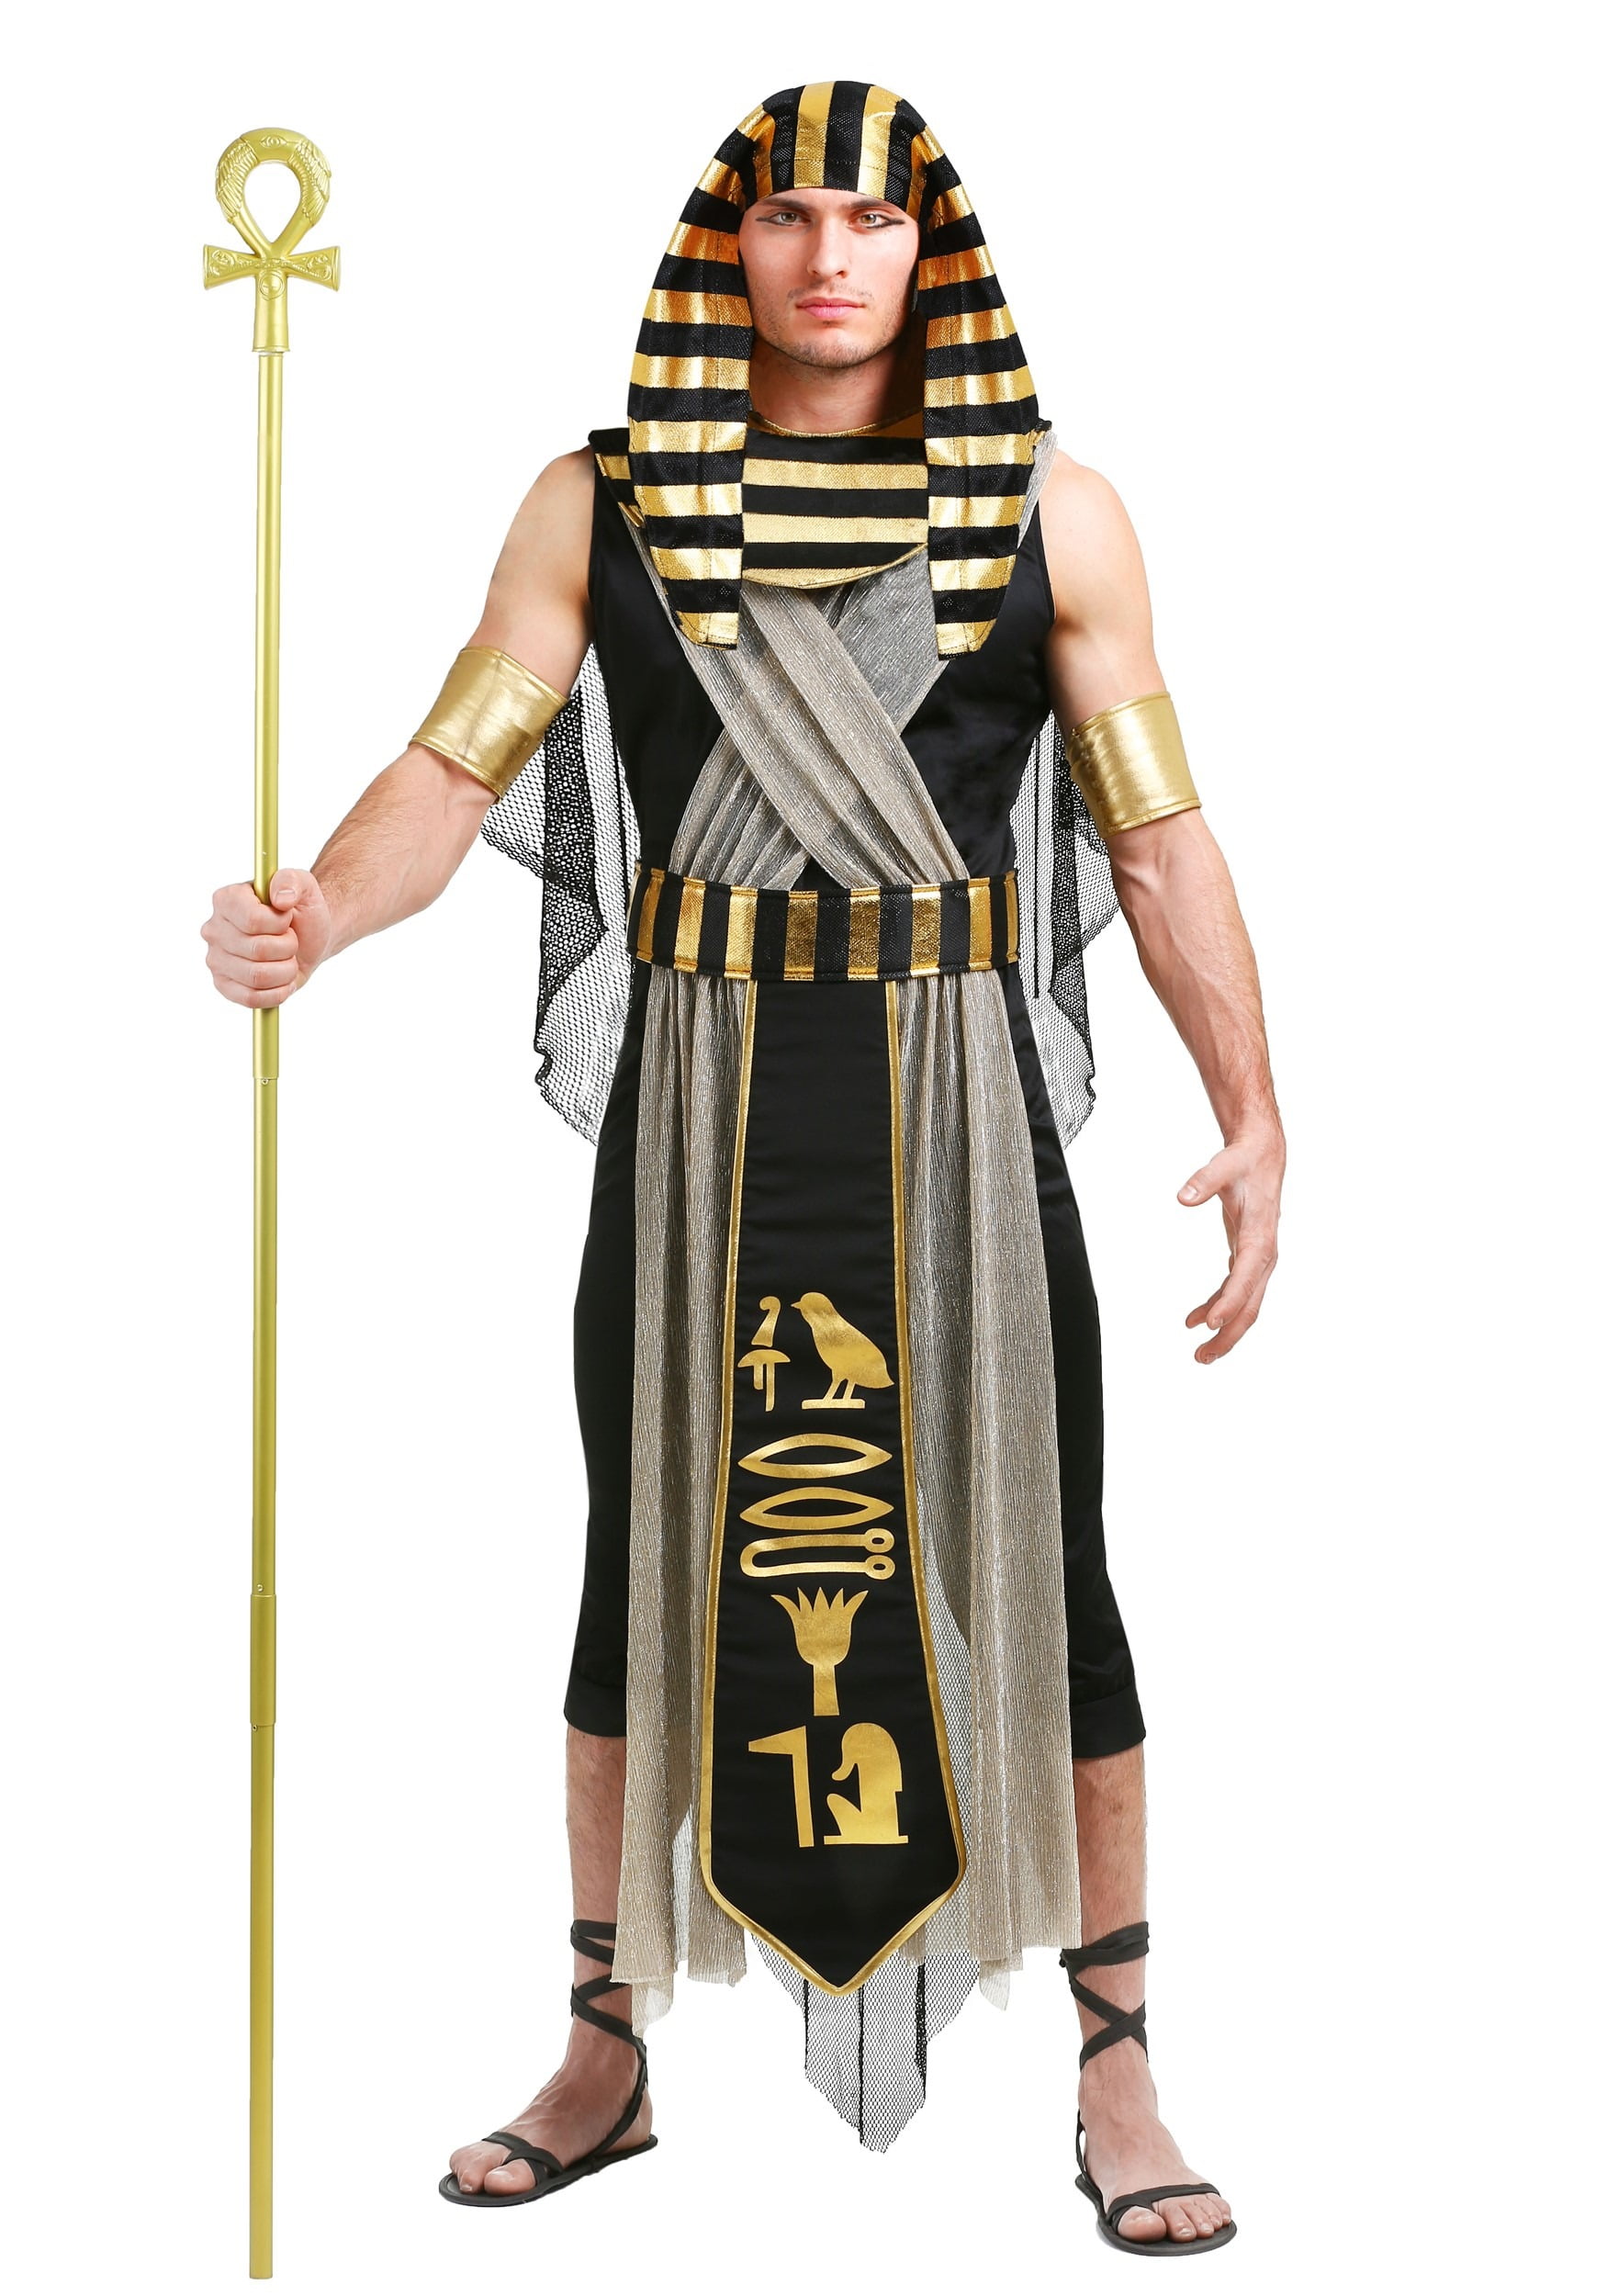 Mens Zombie Pharaoh Costume Adult Egyptian Halloween Fancy Dress Costume Outift